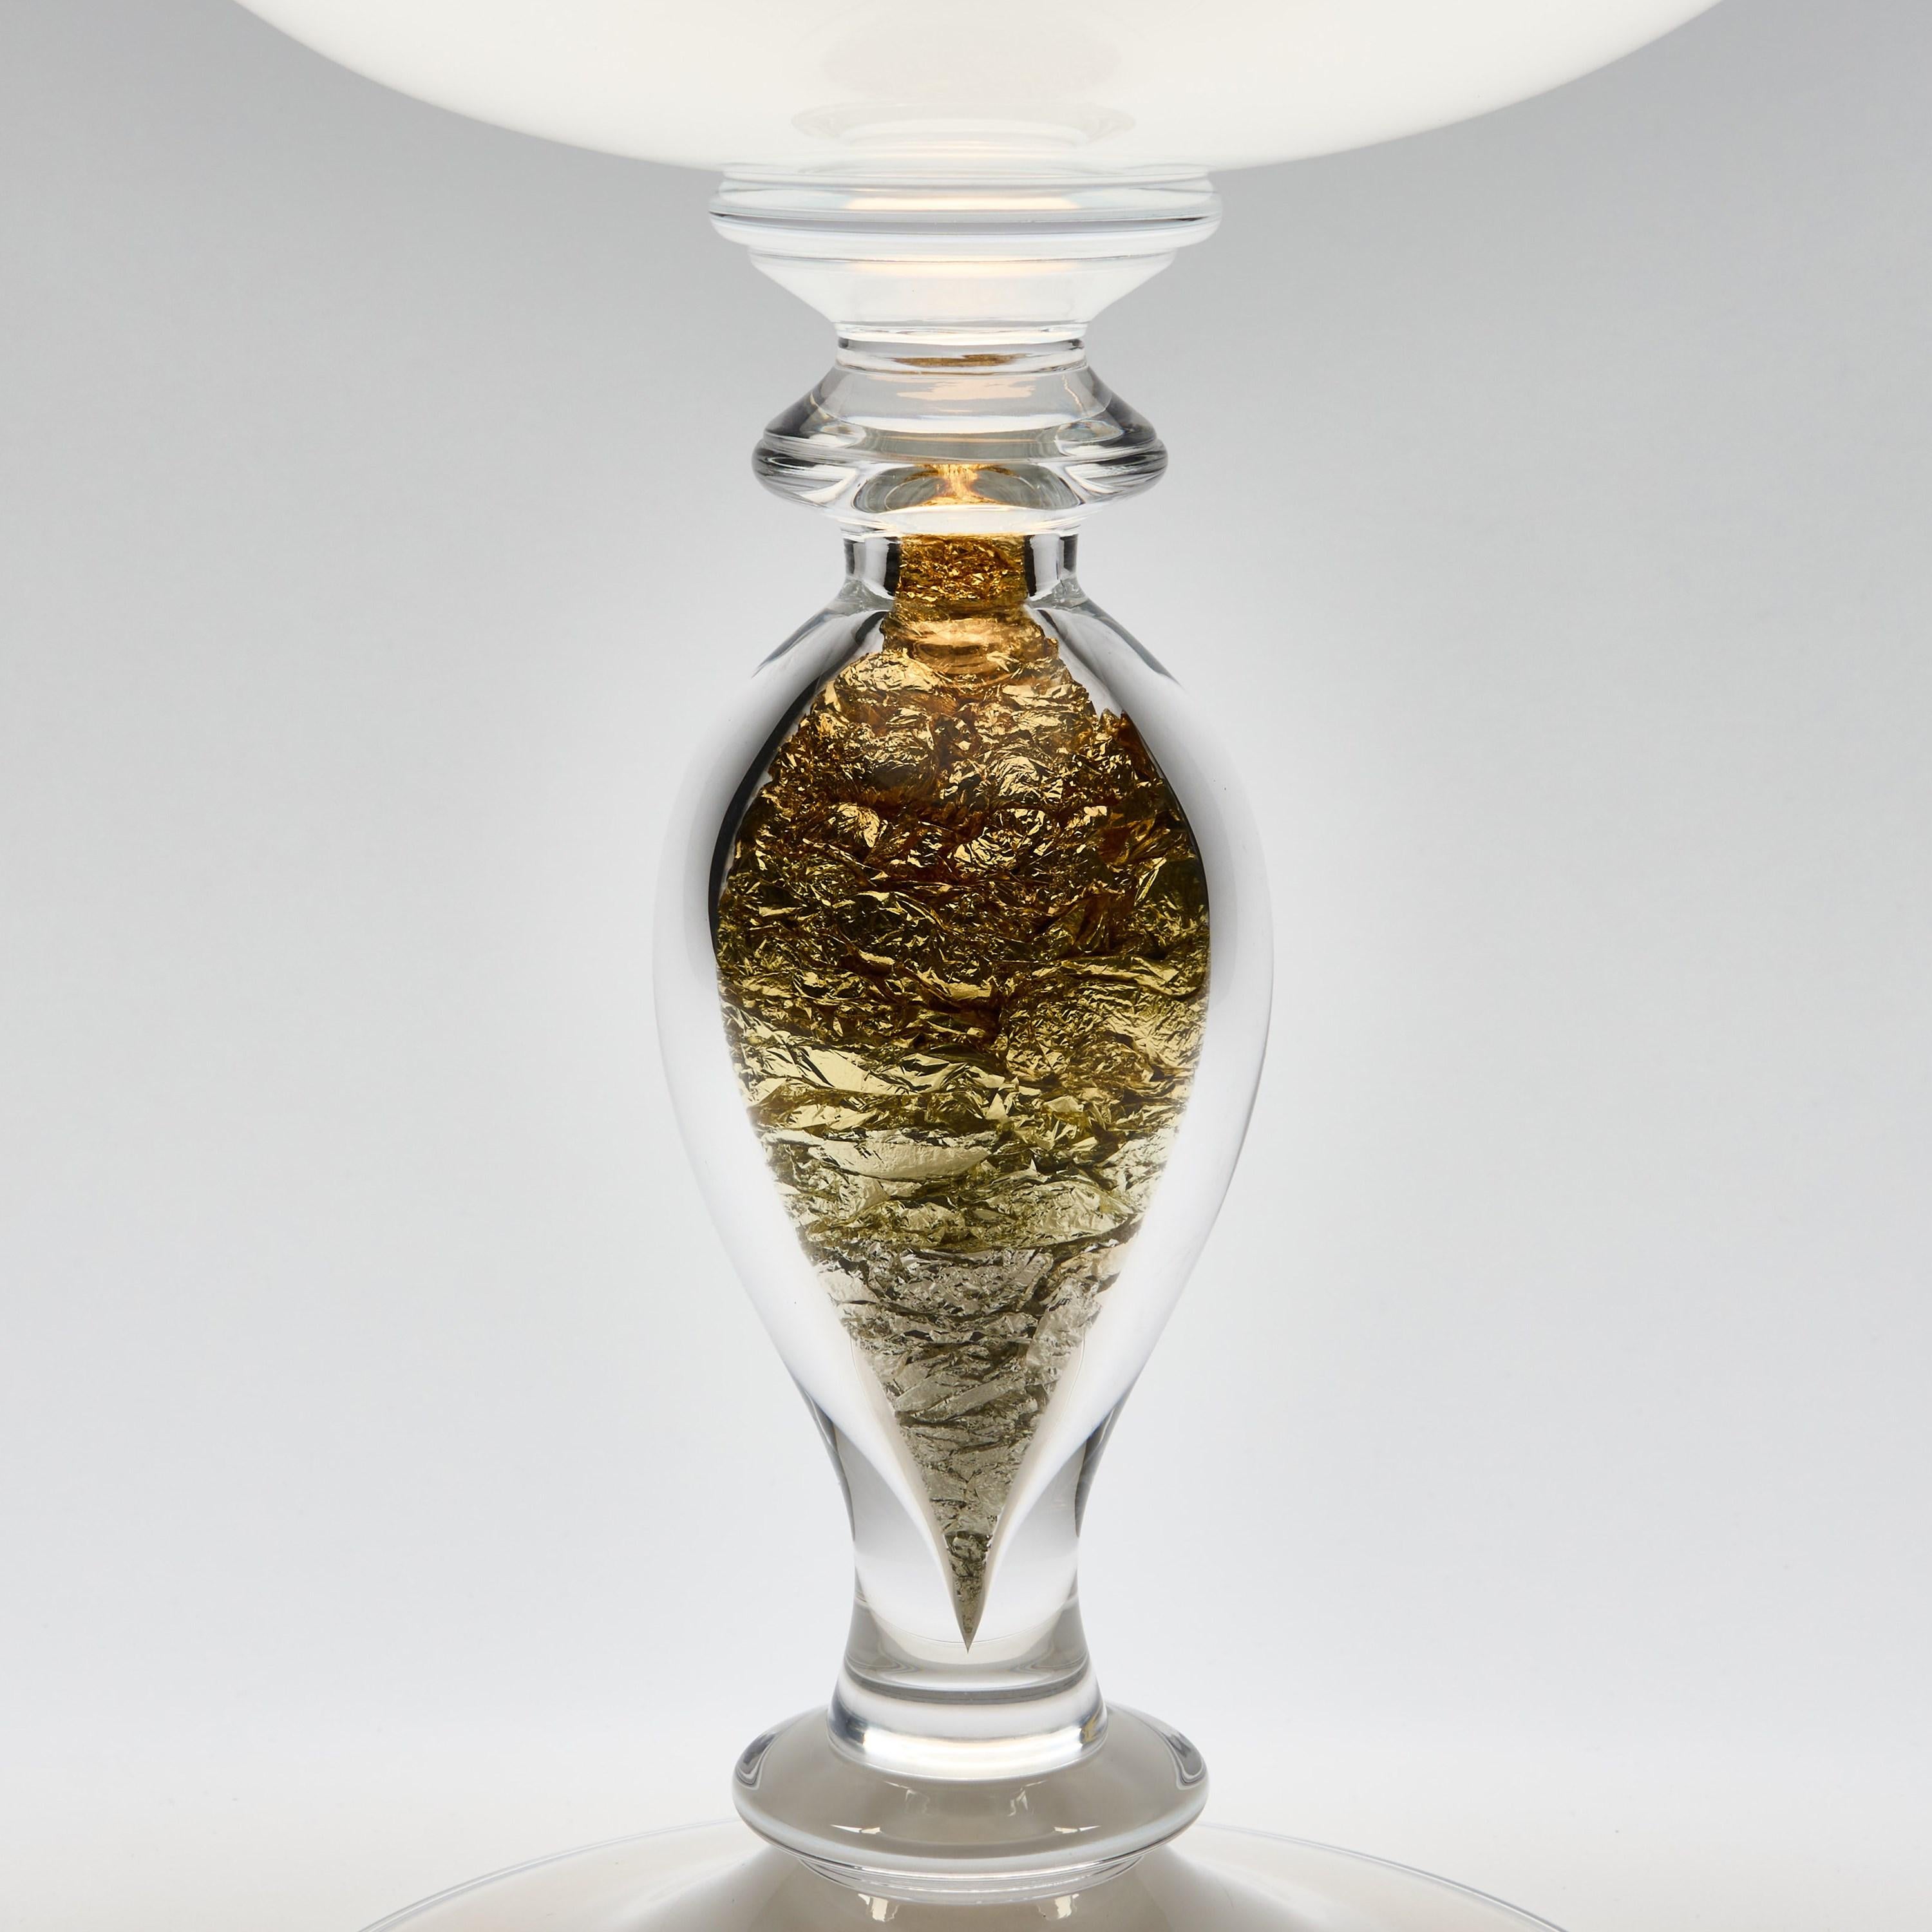 Gold Leaf Gambo d’Oro, a milky white glass & gold leaf centrepiece by Anthony Scala For Sale